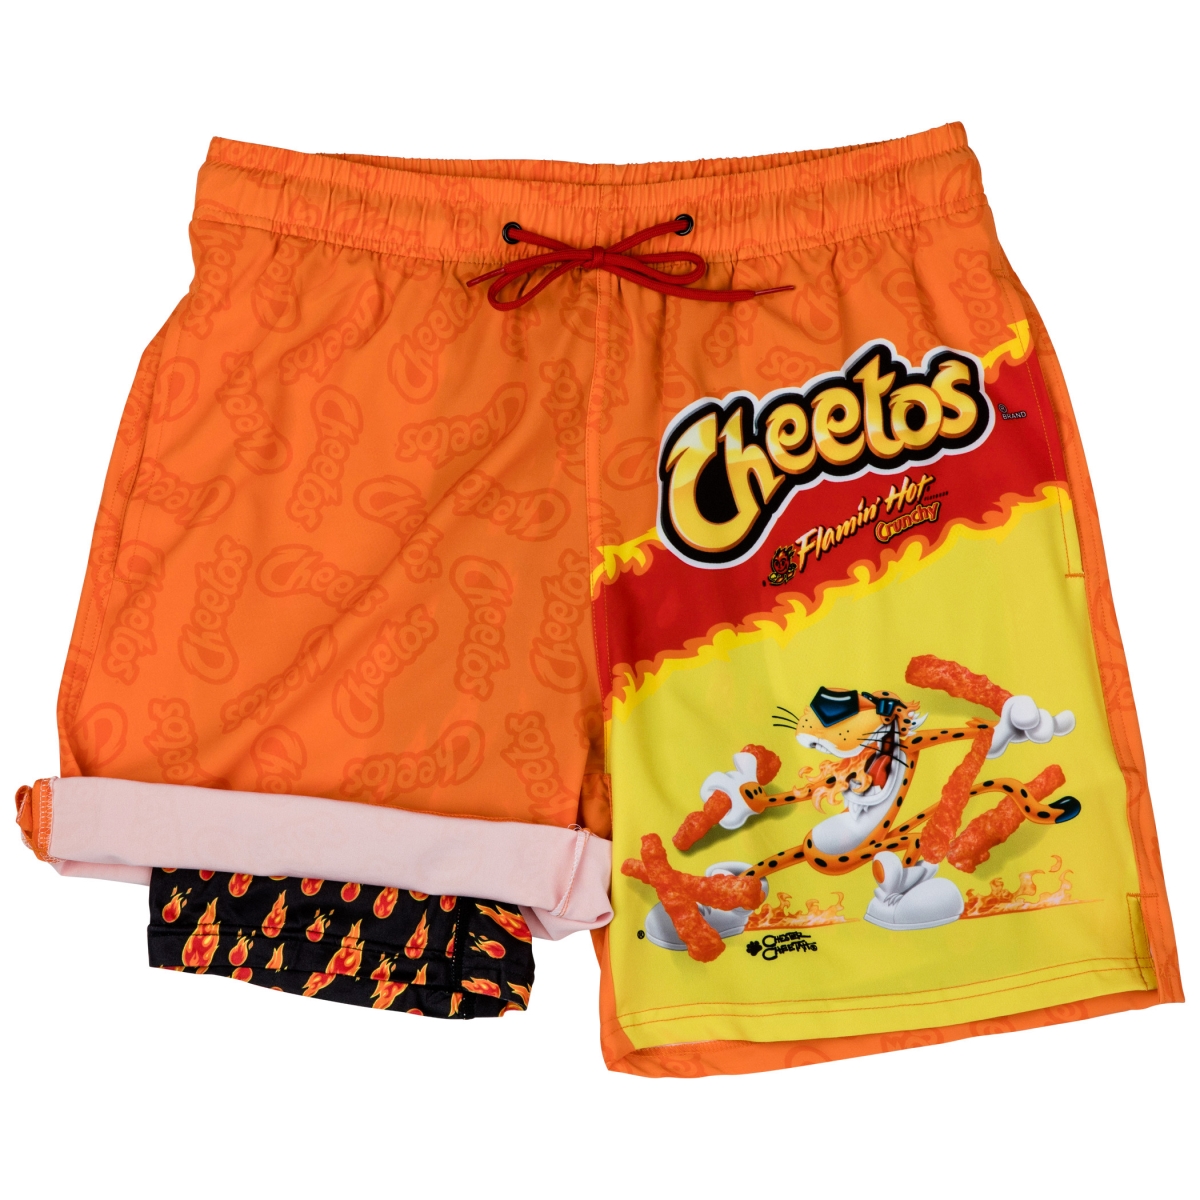 866842-large-36 Flaming Hot Cheetos Bag 6 in. Inseam Lined Swim Trunks, Orange - Large - 36-38 -  Pop Culture, 866842-large(36-